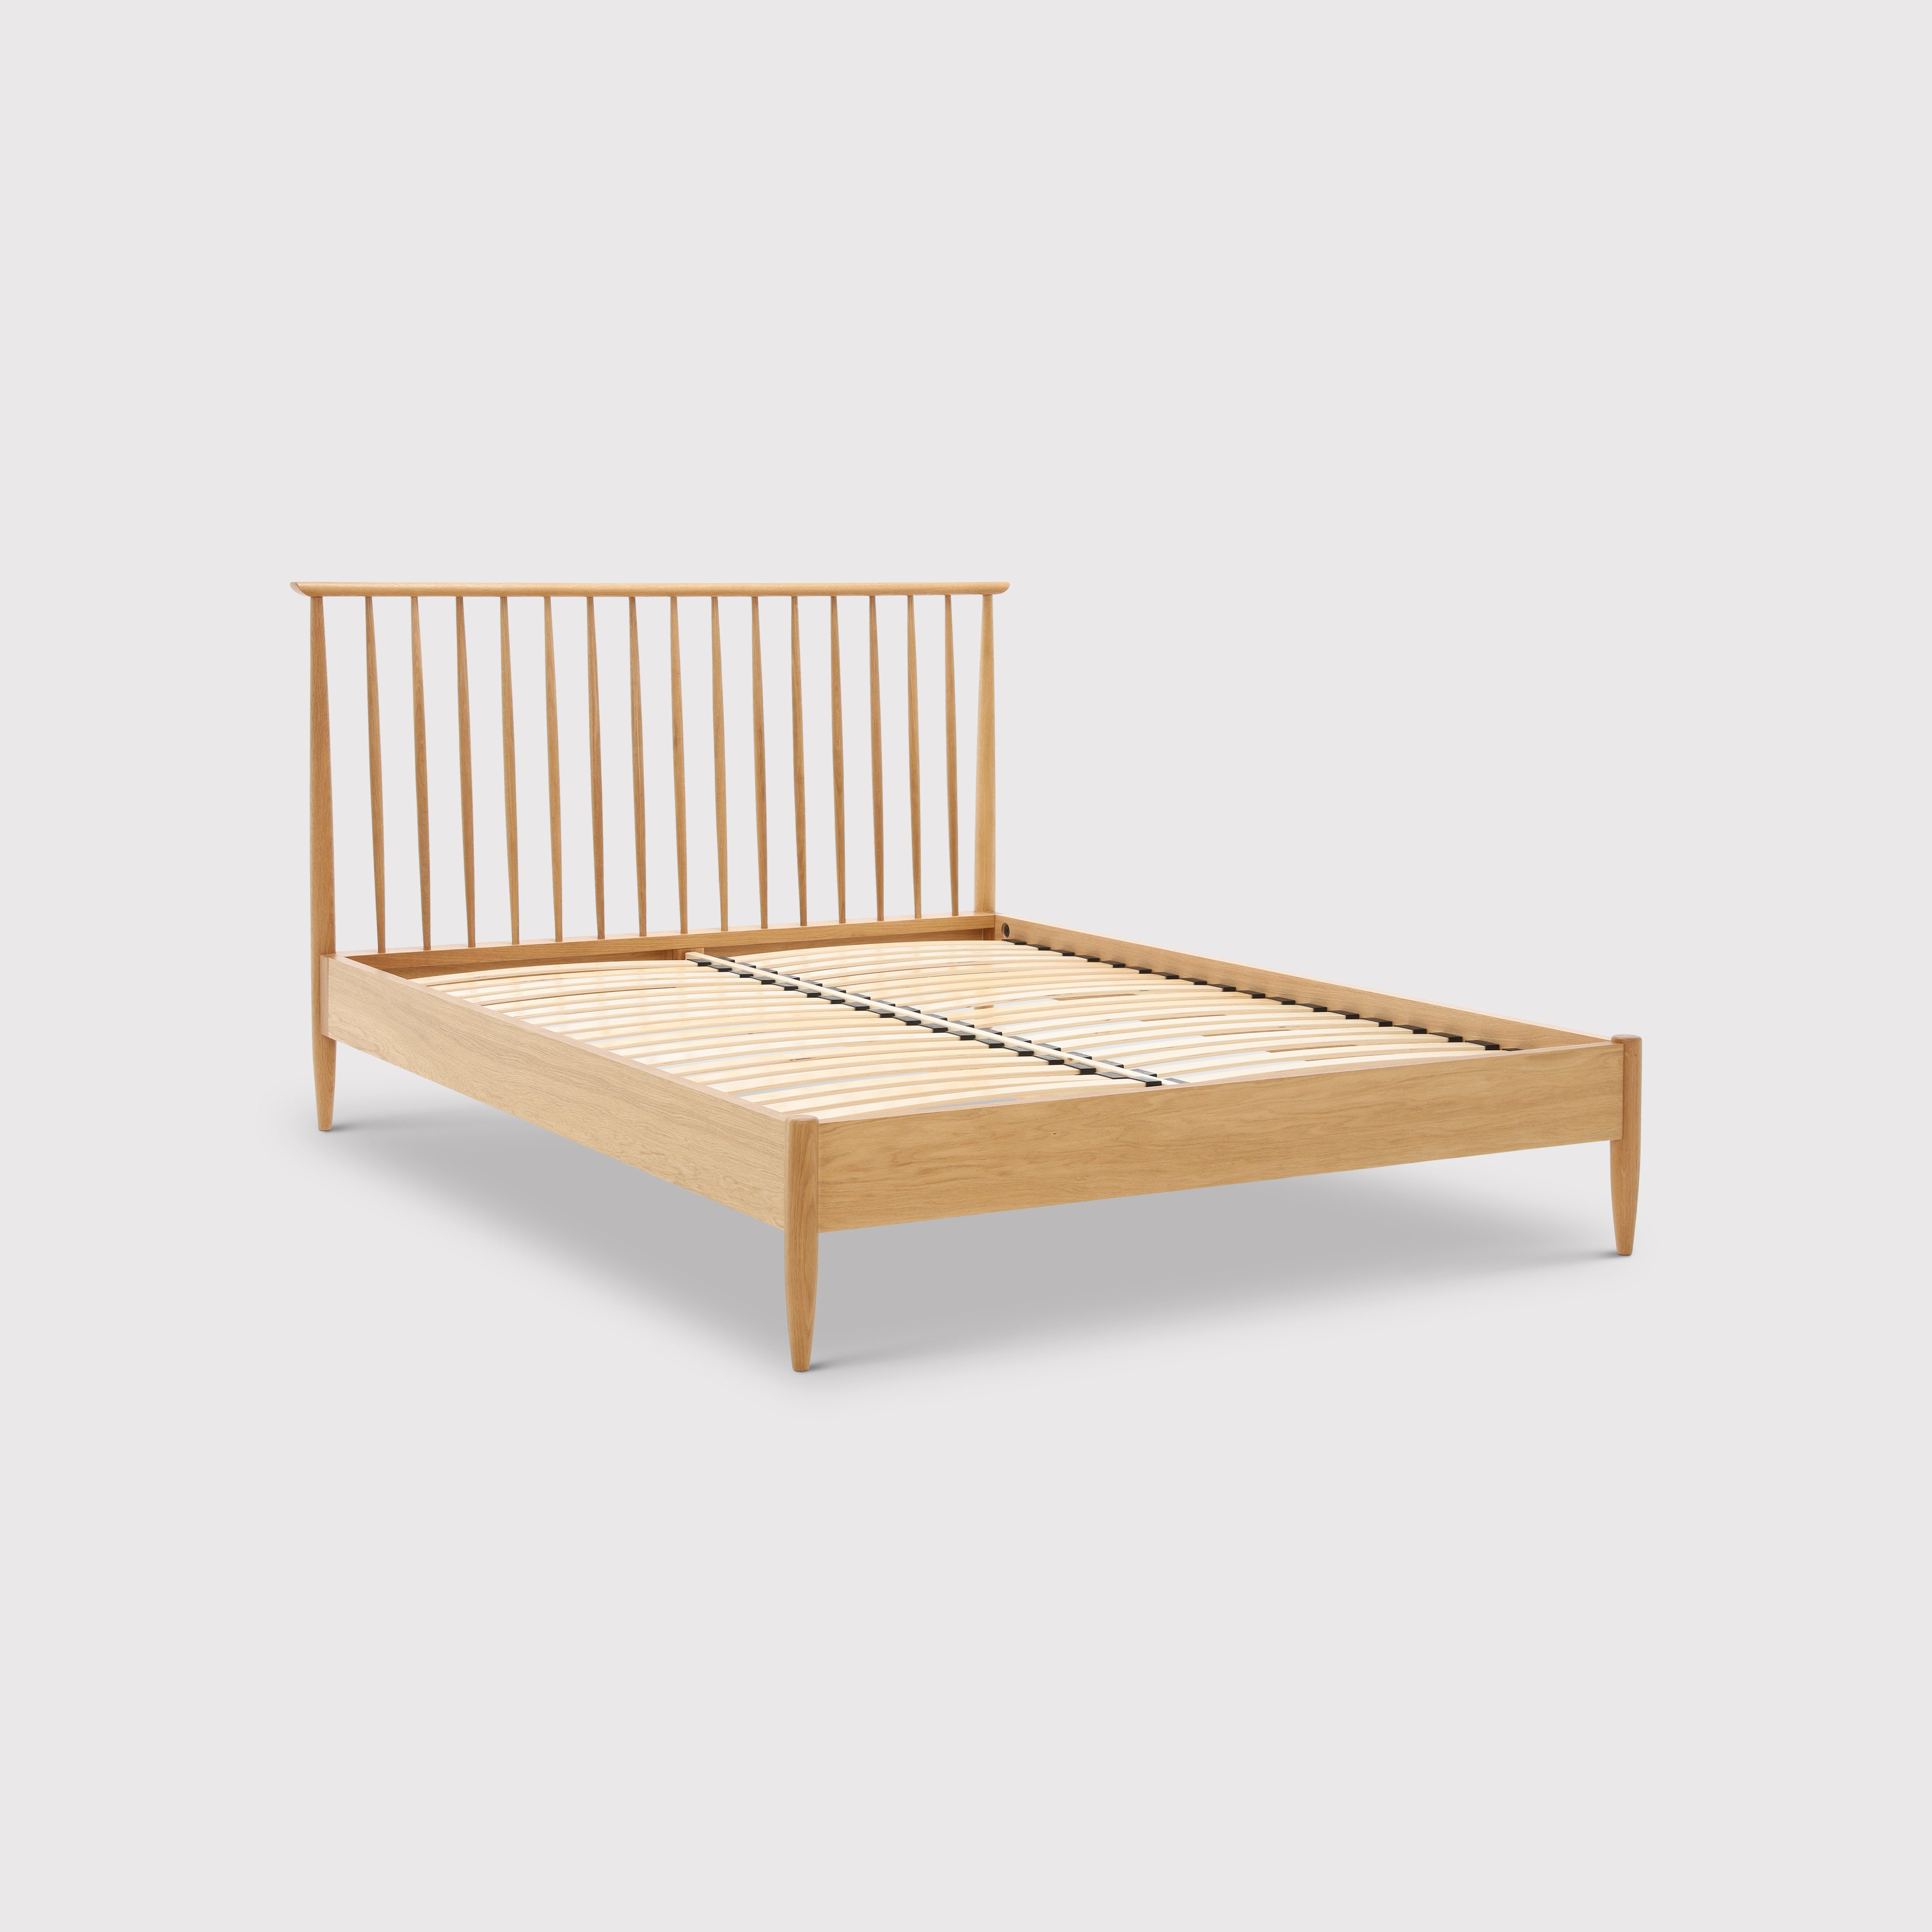 Ercol Teramo Double Bed, Neutral Wood - Barker & Stonehouse - image 1